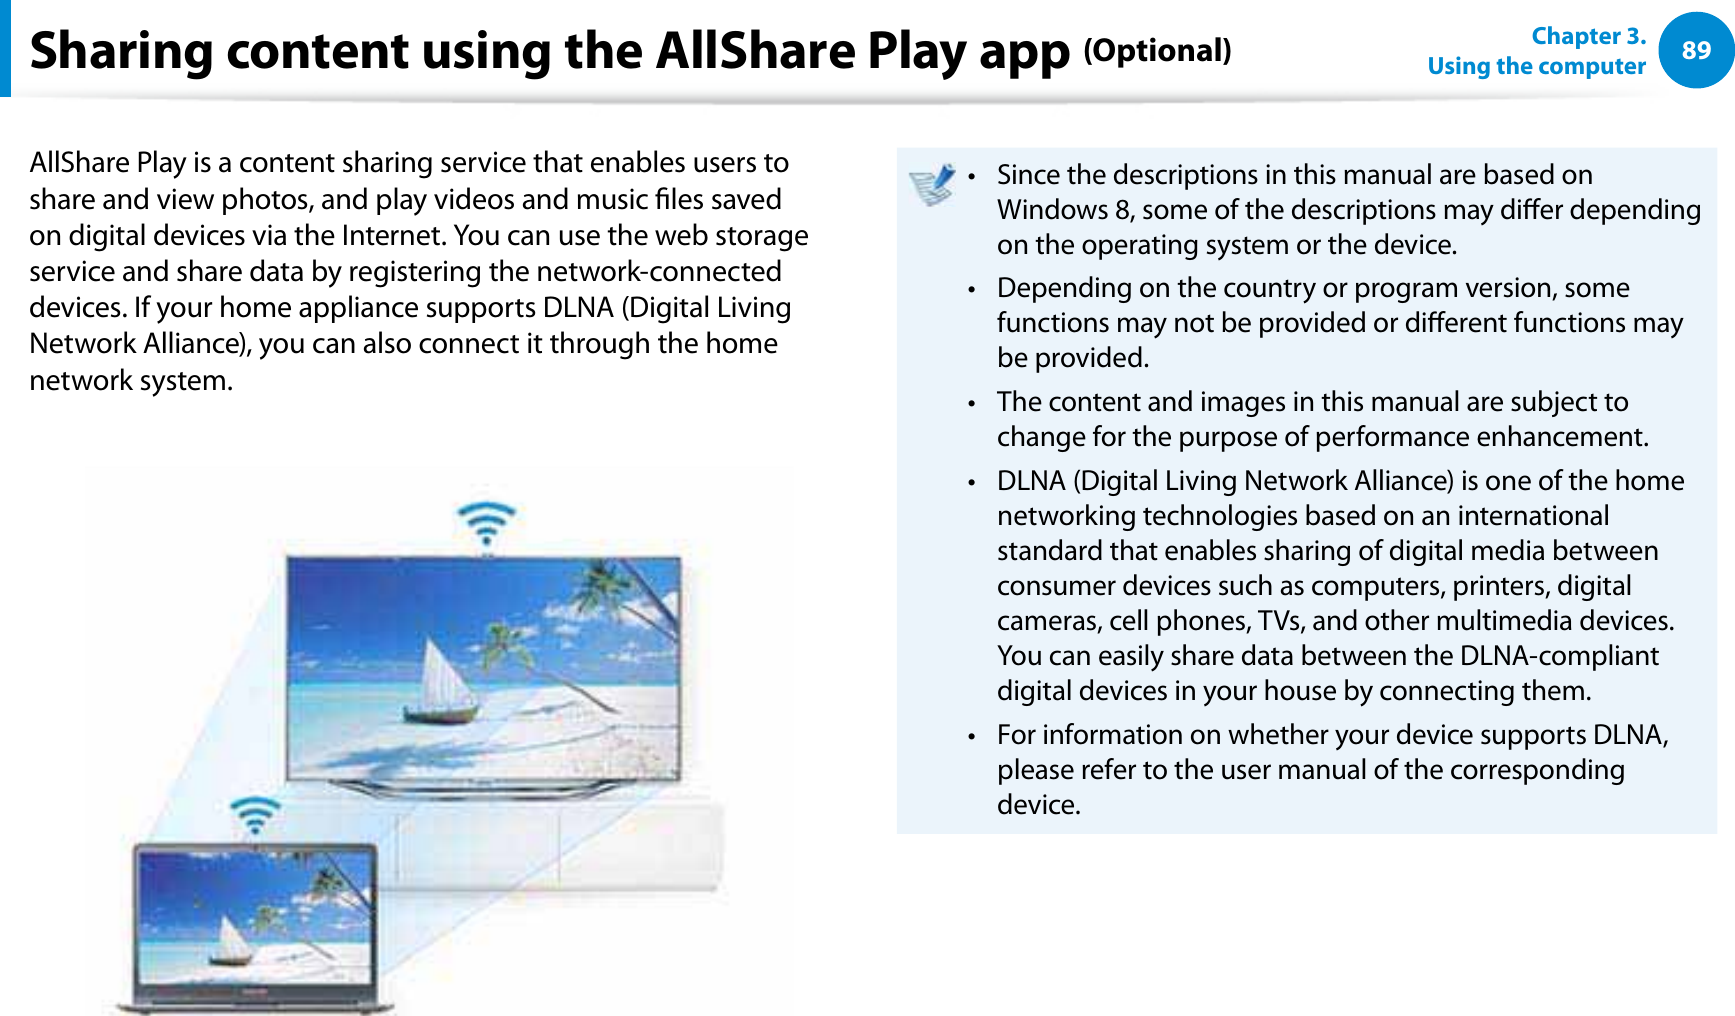 89Chapter 3.  Using the computerSharing content using the AllShare Play app (Optional)AllShare Play is a content sharing service that enables users to share and view photos, and play videos and music les saved on digital devices via the Internet. You can use the web storage service and share data by registering the network-connected devices. If your home appliance supports DLNA (Digital Living Network Alliance), you can also connect it through the home network system.Since the descriptions in this manual are based on t Windows 8, some of the descriptions may dier depending on the operating system or the device.Depending on the country or program version, some t functions may not be provided or dierent functions may be provided.The content and images in this manual are subject to t change for the purpose of performance enhancement.DLNA (Digital Living Network Alliance) is one of the home t networking technologies based on an international standard that enables sharing of digital media between consumer devices such as computers, printers, digital cameras, cell phones, TVs, and other multimedia devices. You can easily share data between the DLNA-compliant digital devices in your house by connecting them.For information on whether your device supports DLNA, t please refer to the user manual of the corresponding device.